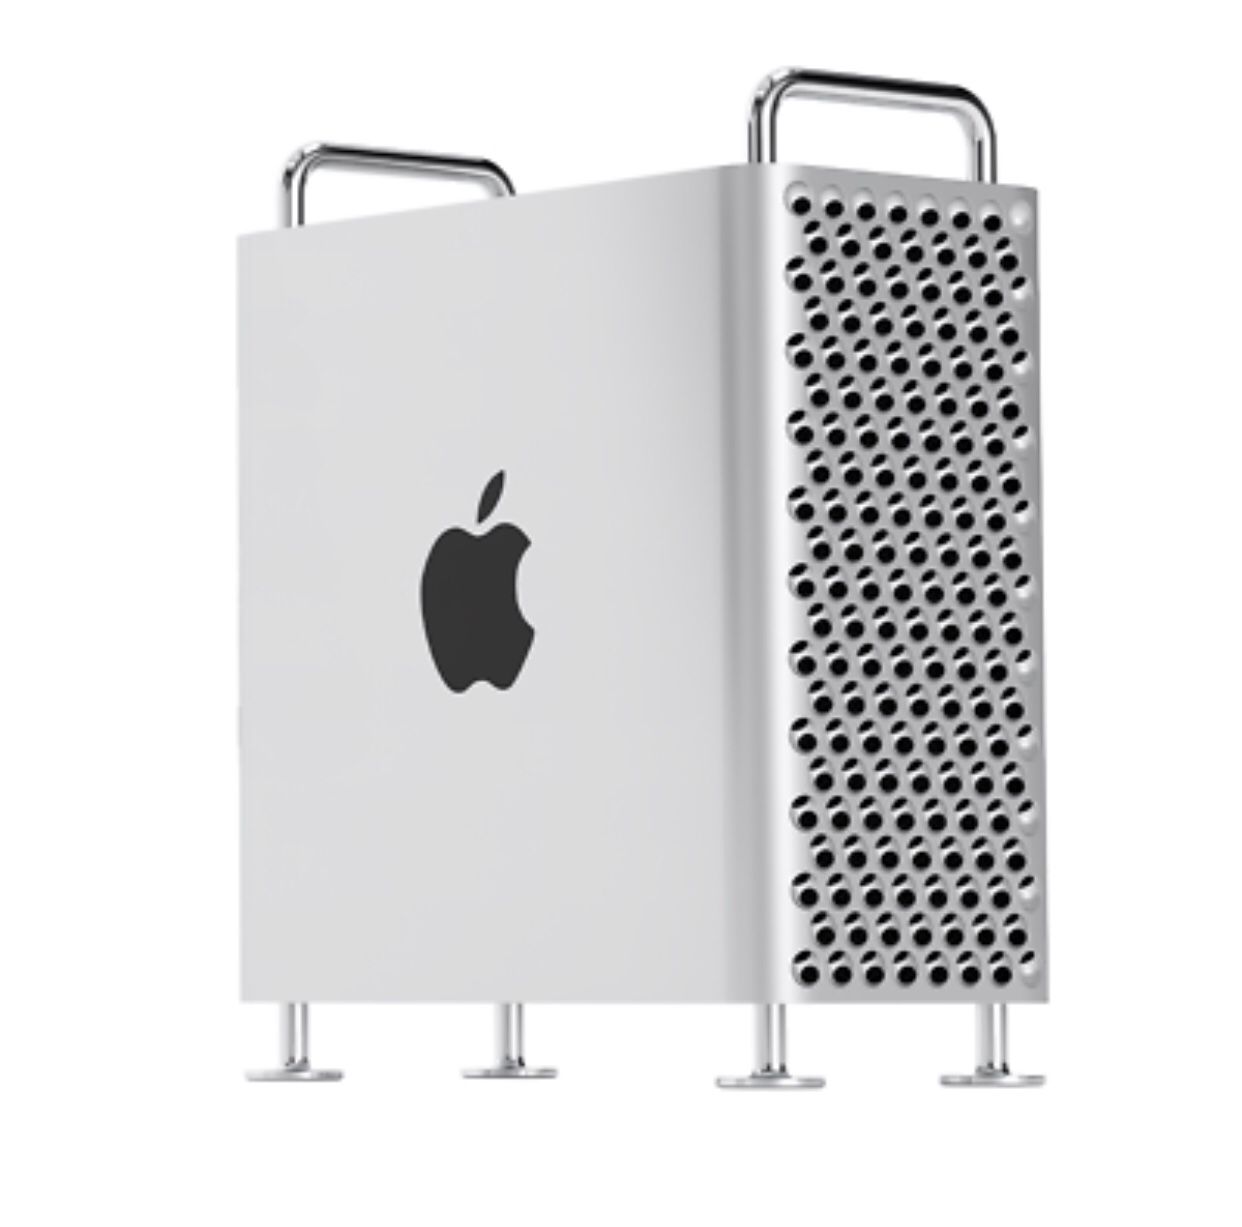 Mac Pro Towers (2019) - UNBOXED